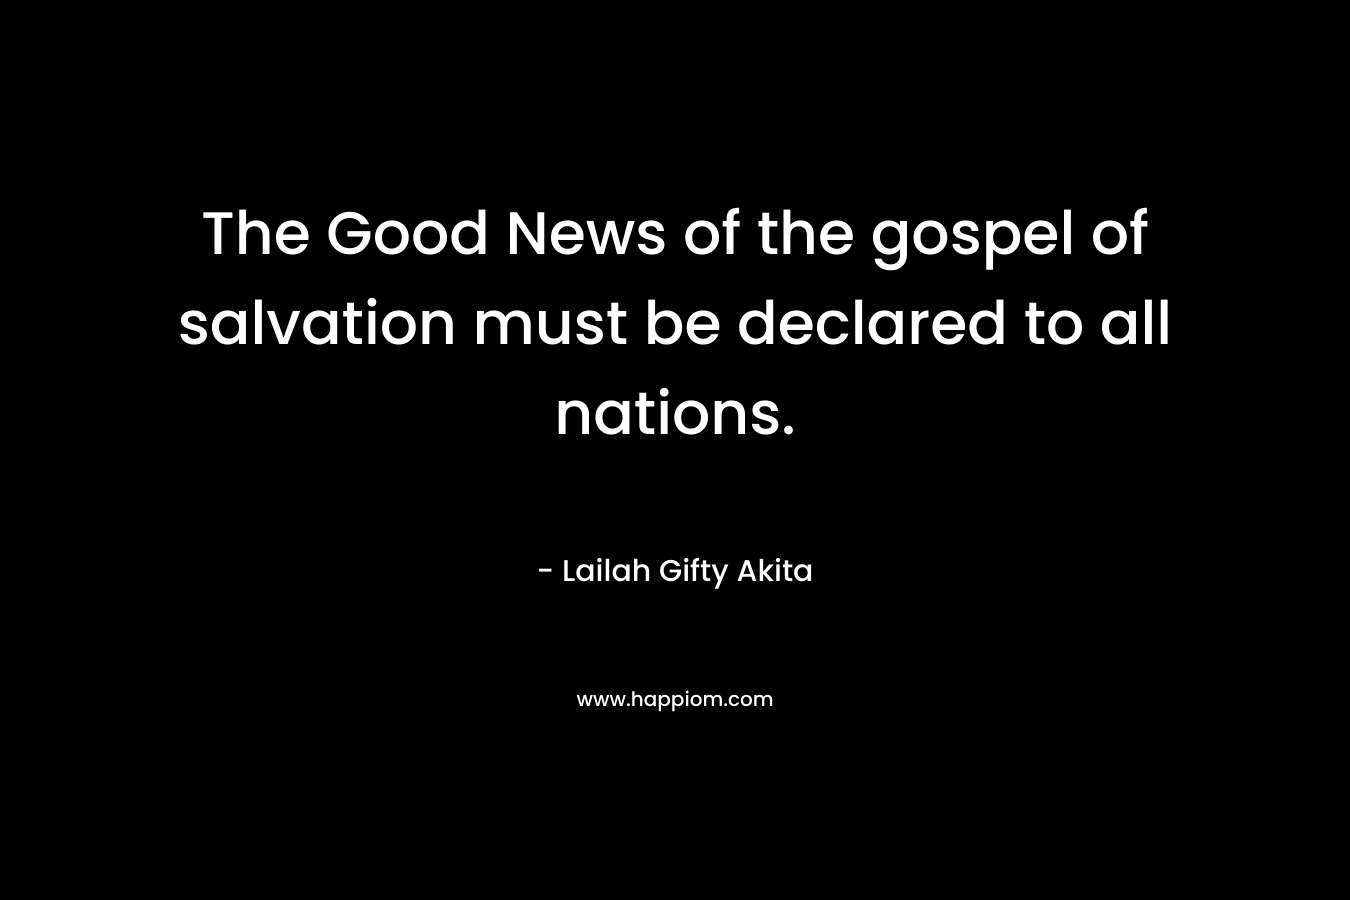 The Good News of the gospel of salvation must be declared to all nations.